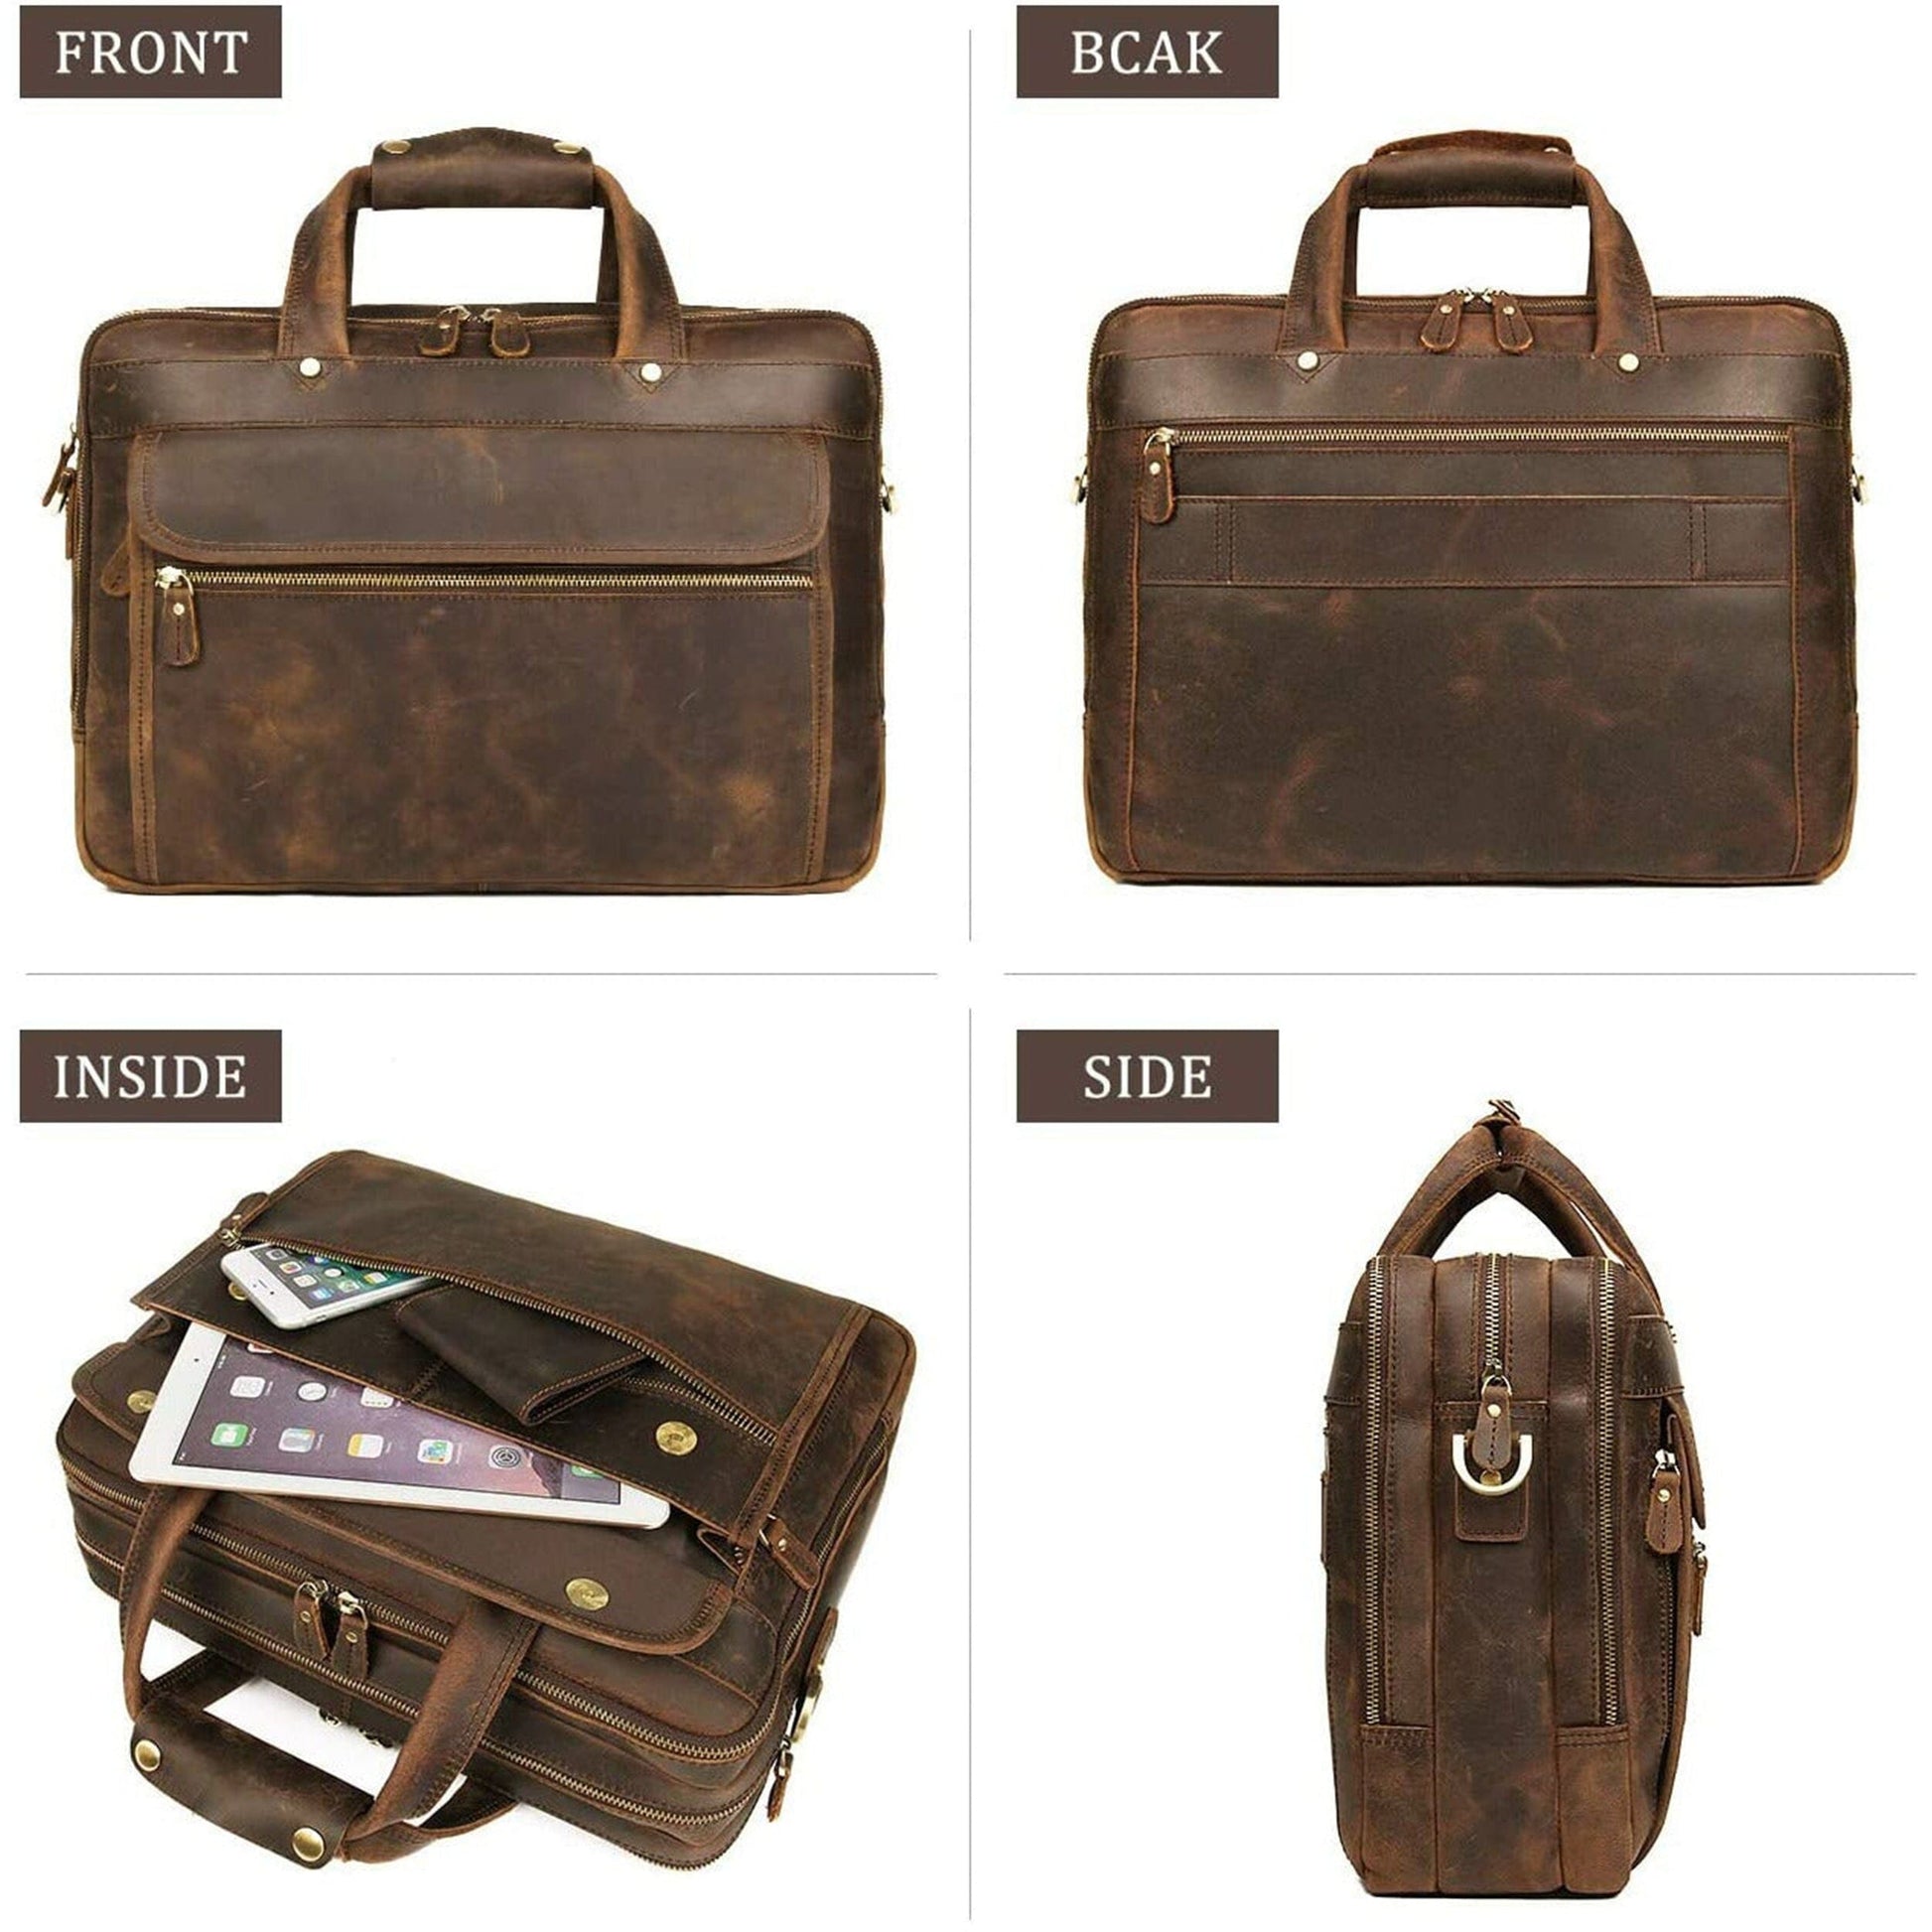 Crazy Horse Leather Briefcase - The Tool Store